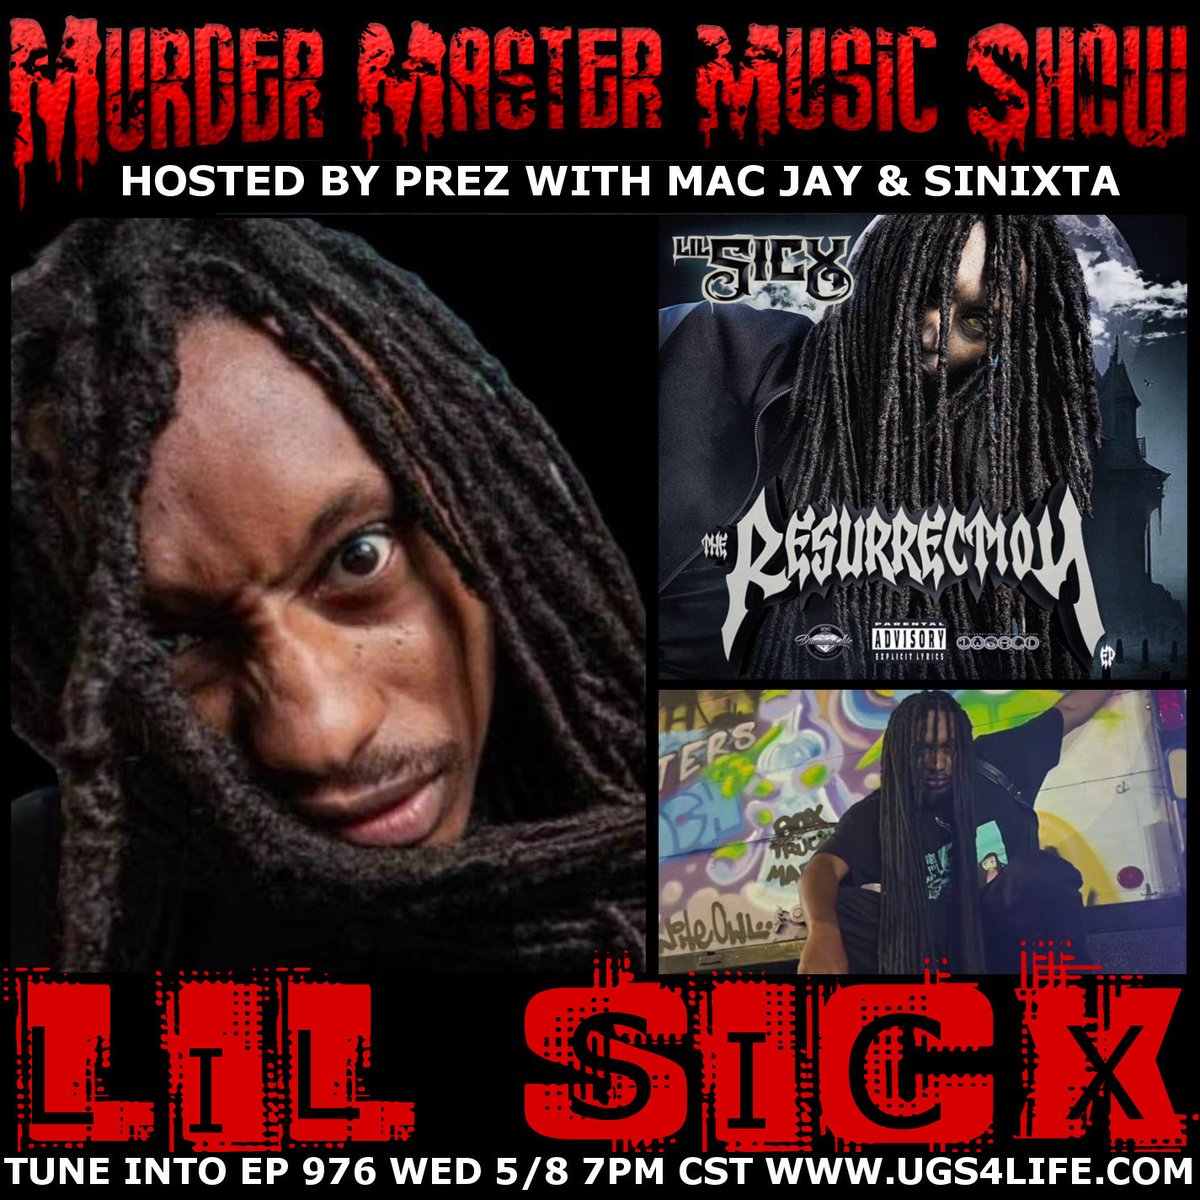 Tune into Ep 976 Wed 5/8 7pm CST 
w/  @lilsicx at ugs4life.com 
Like, Share, Follow 
Murder Master Music Show 

#lilsicx
#siccness
#murdermastermusicshow
#undergroundrap
#realrap
#sacramento 
#sactown
#originalrappodcast
#rapinterview
#hiphopinterview 
#UGS4LIFE